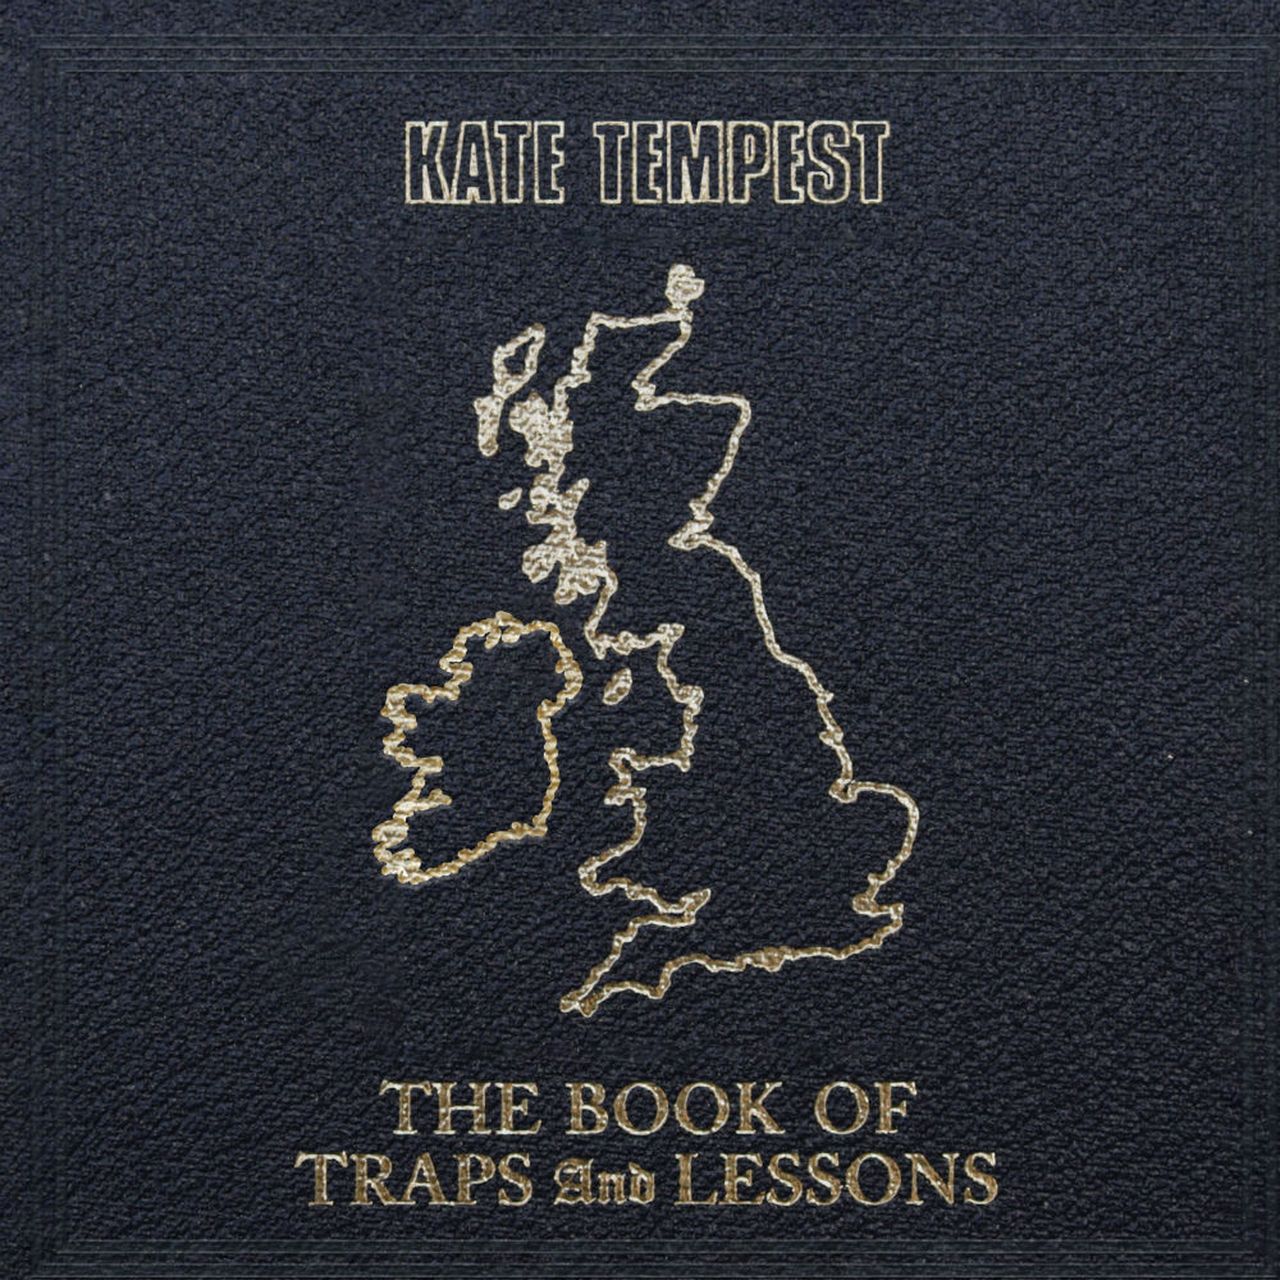 Cover Kate Tempest Album "The Book of Traps and Lessons"